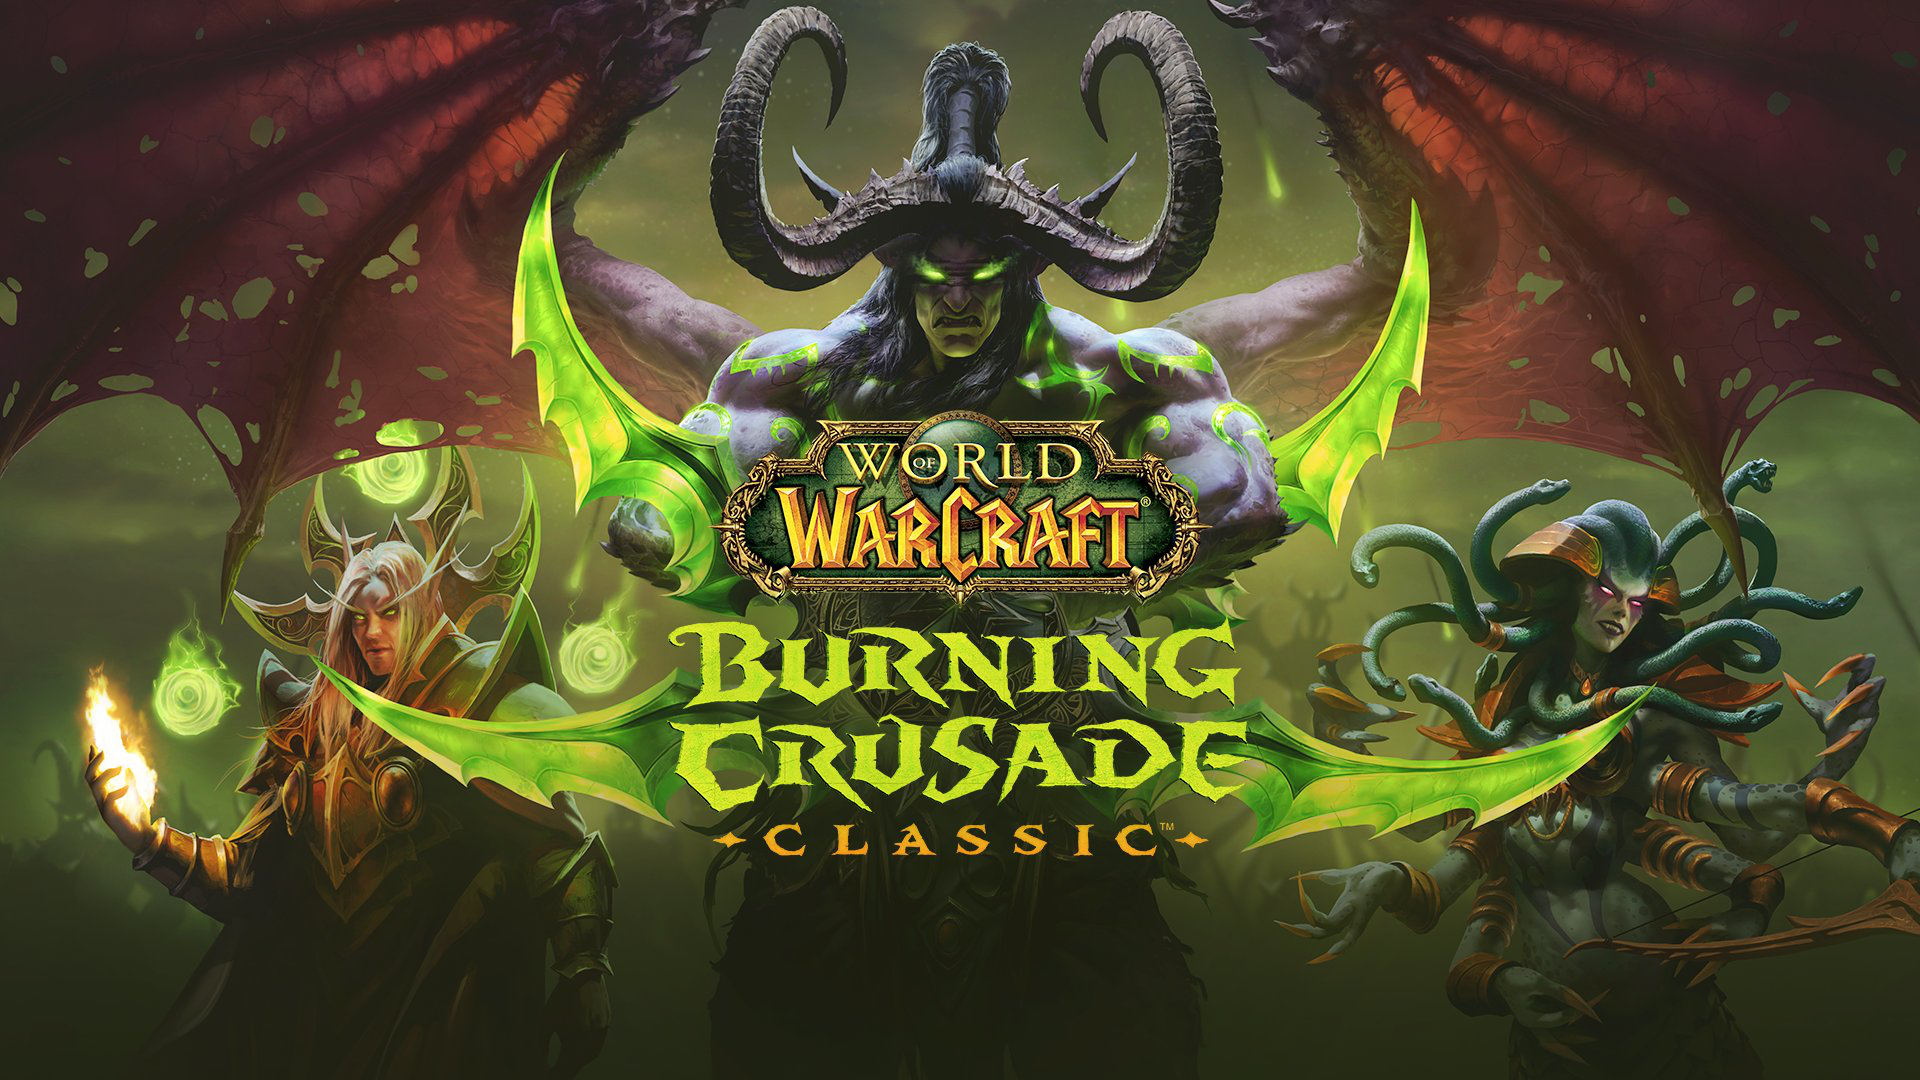 Leaderboard: Are you hyped for WoW Burning Crusade Classic